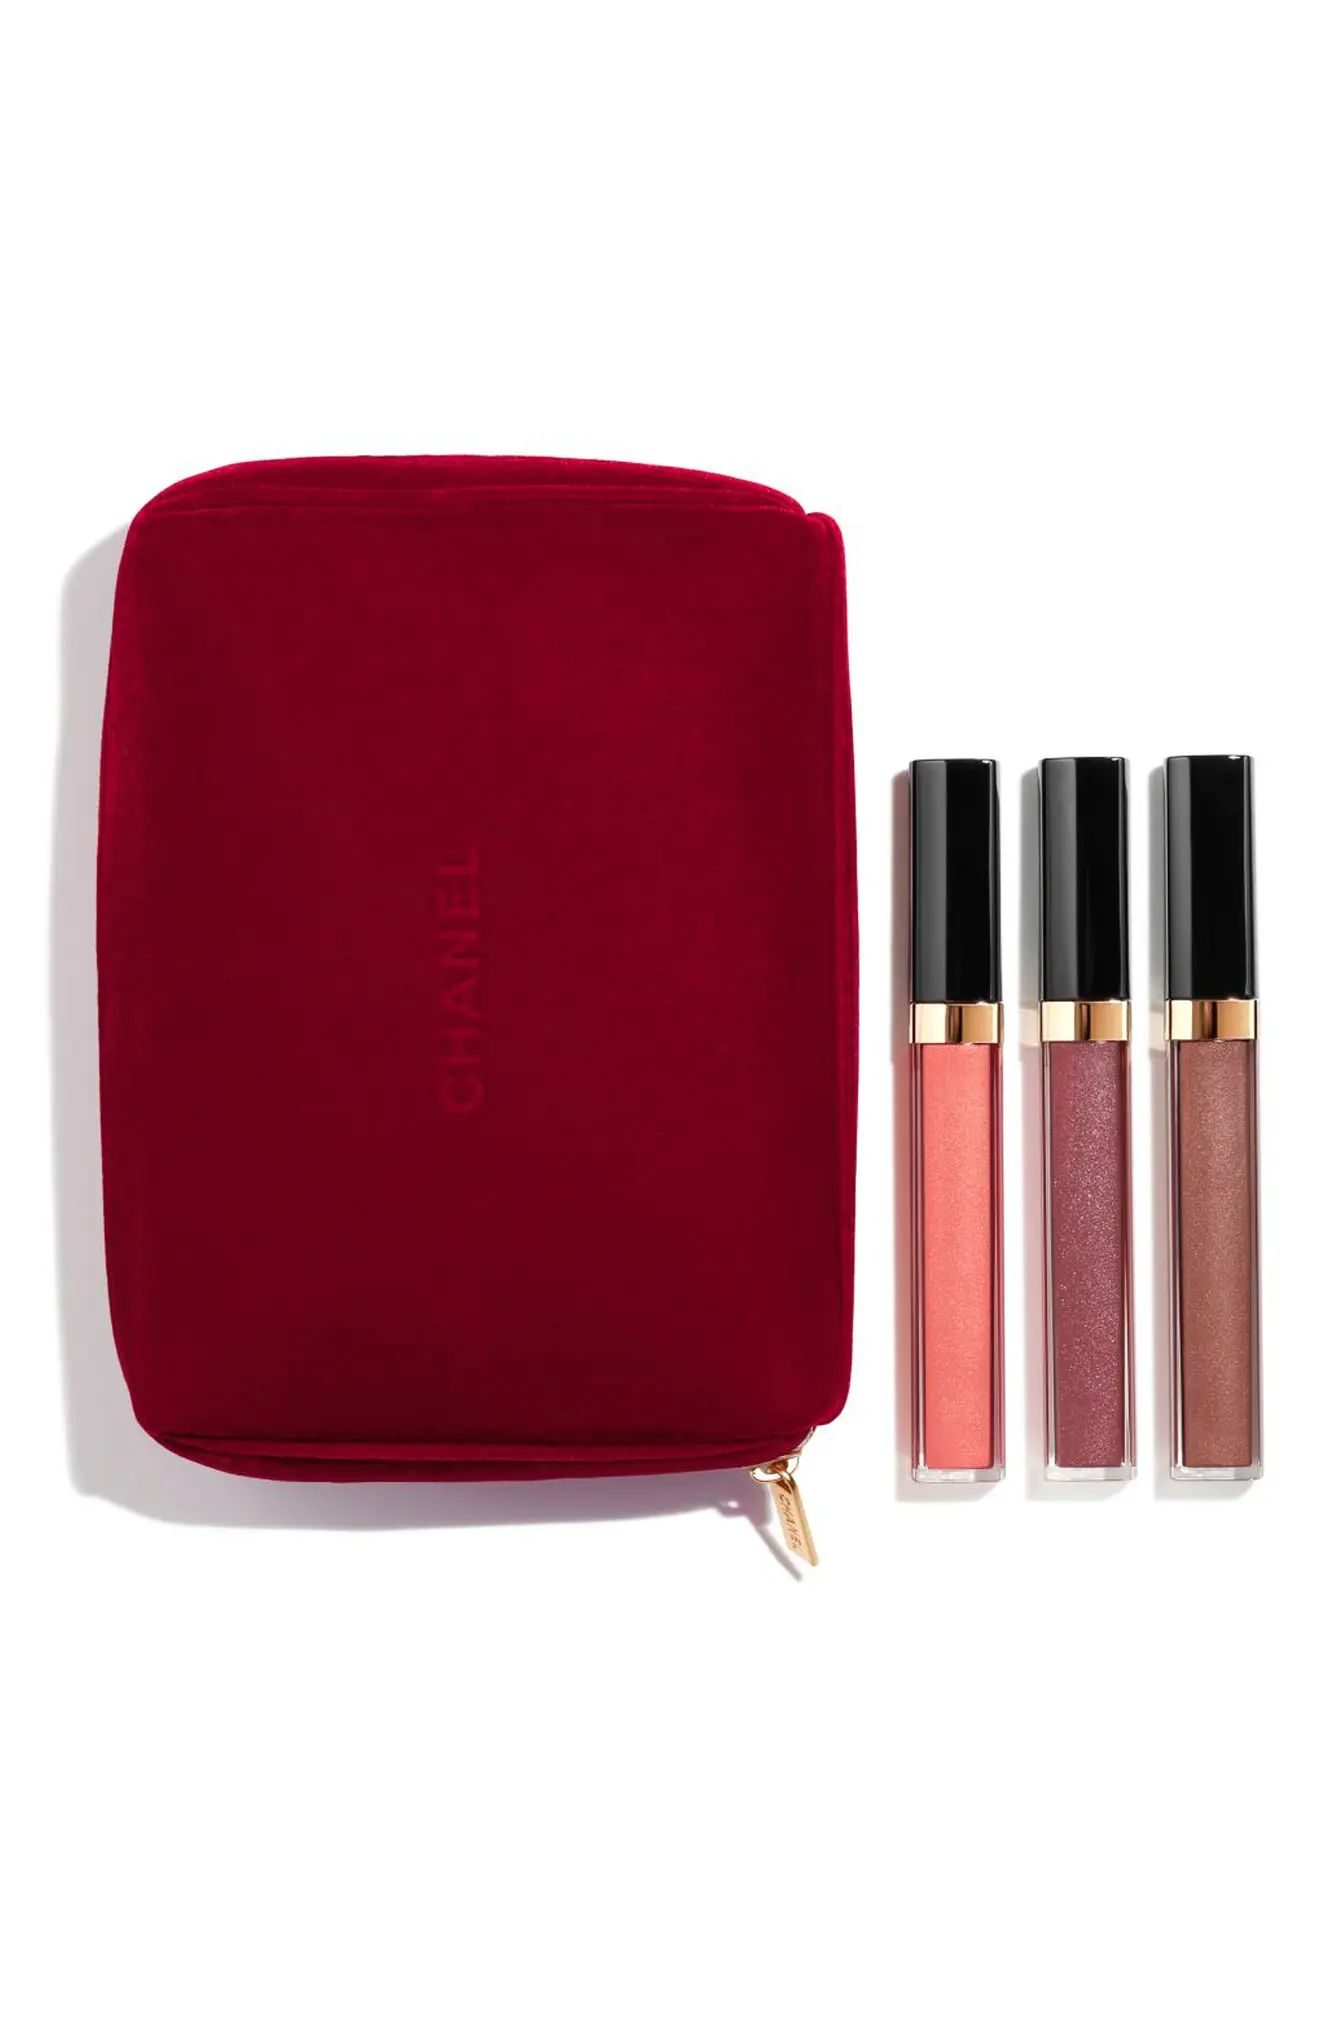 CHANEL ROUGE COCO GLOSS Trio | Nordstrom